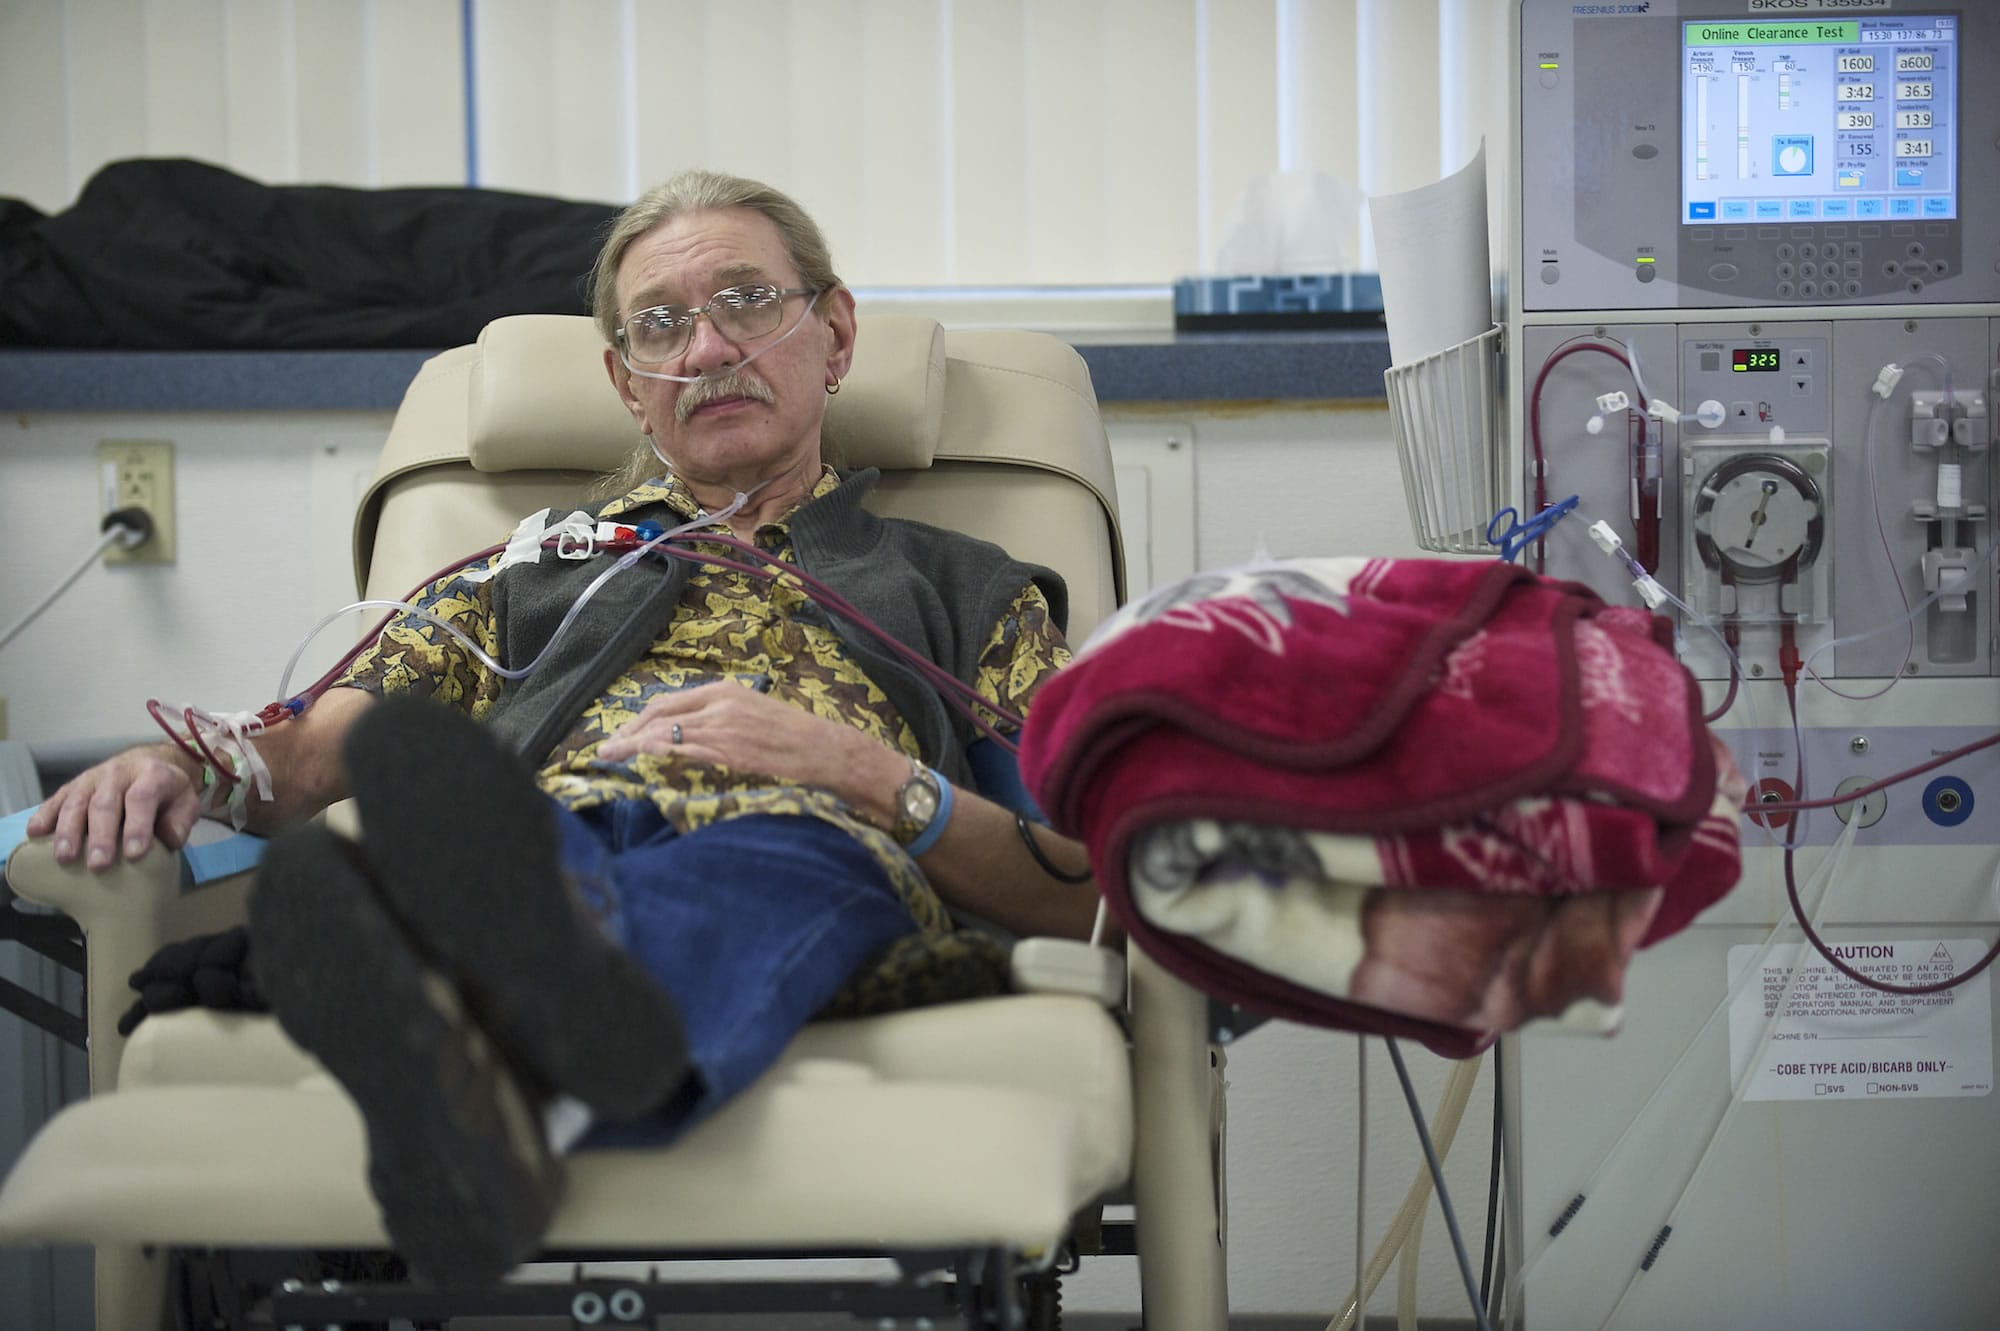 Larry Sperry receives dialysis treatment at Fresenius Medical Care in Salmon Creek. For nine months, Sperry underwent treatment three days a week on the center's nocturnal shift from 11 p.m. to 3 a.m.